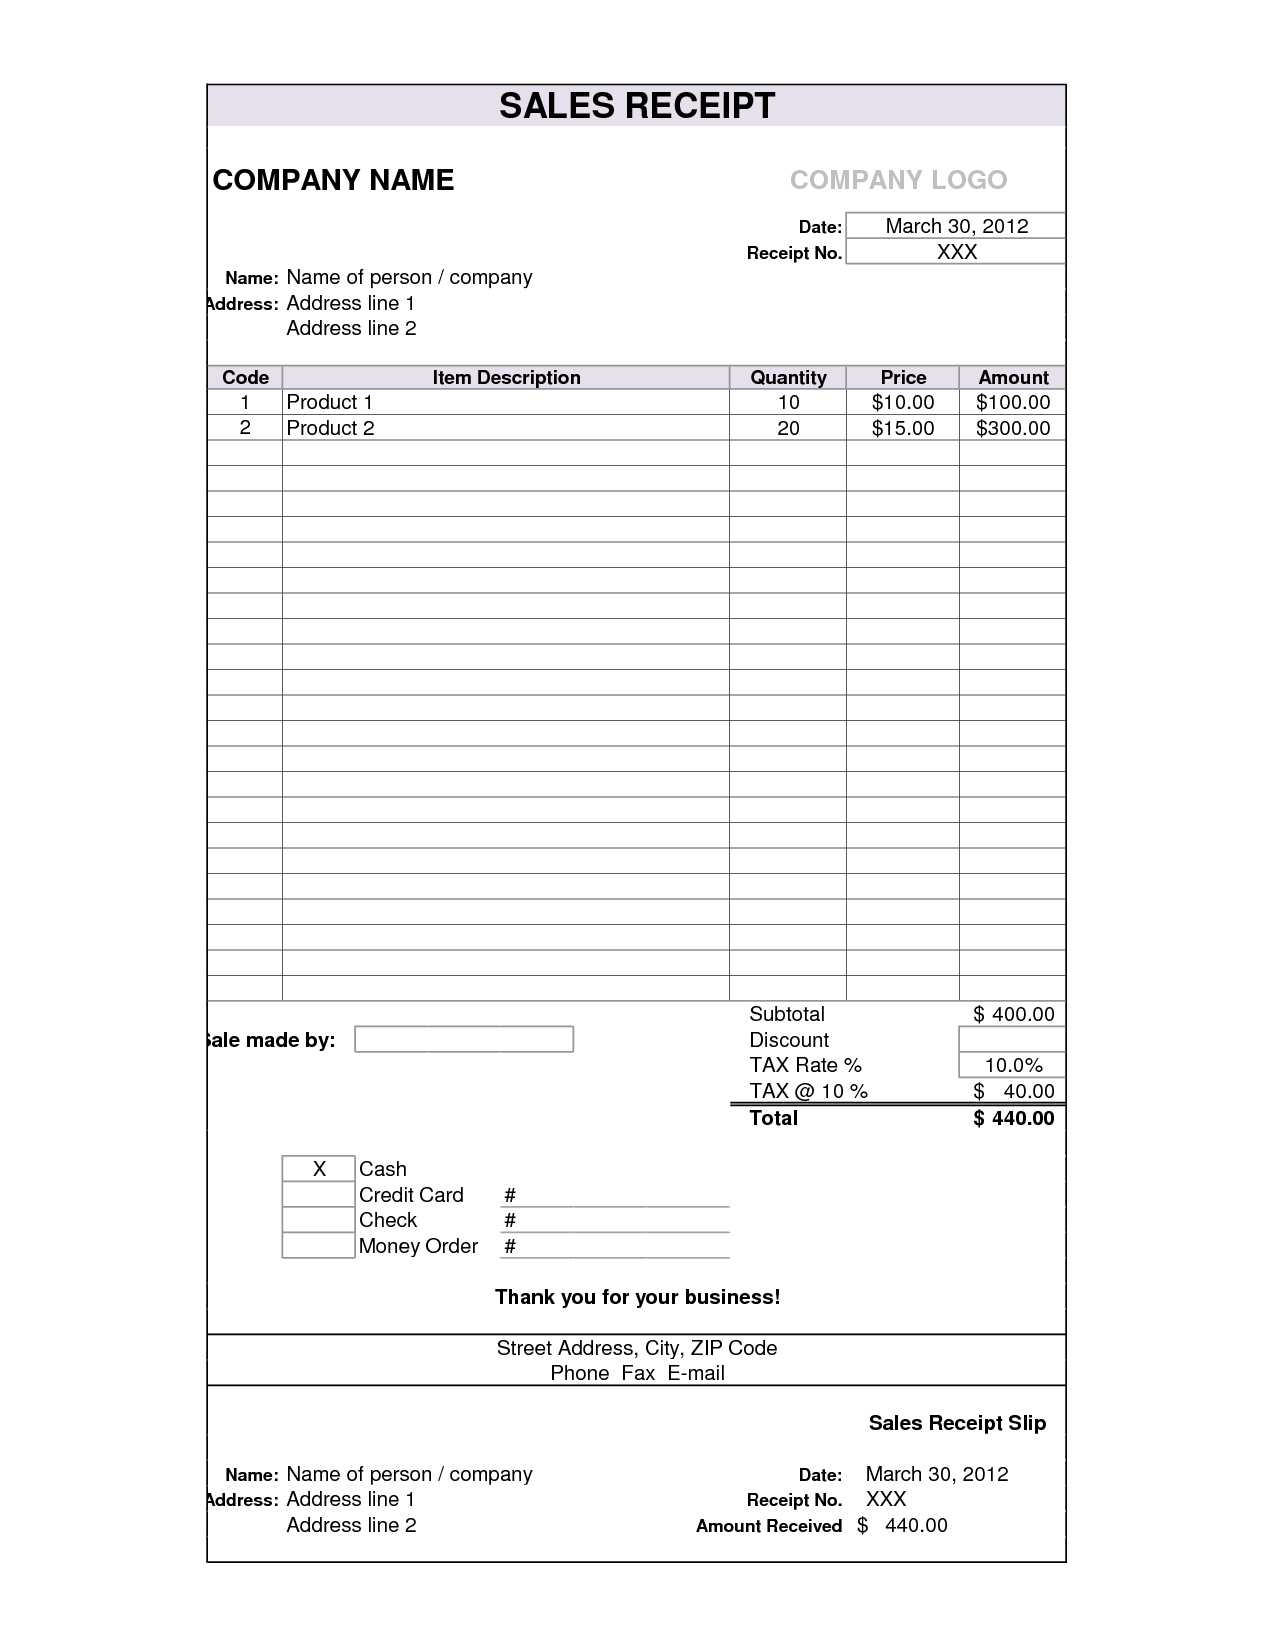 5-best-images-of-credit-card-sales-receipt-forms-templates-printable